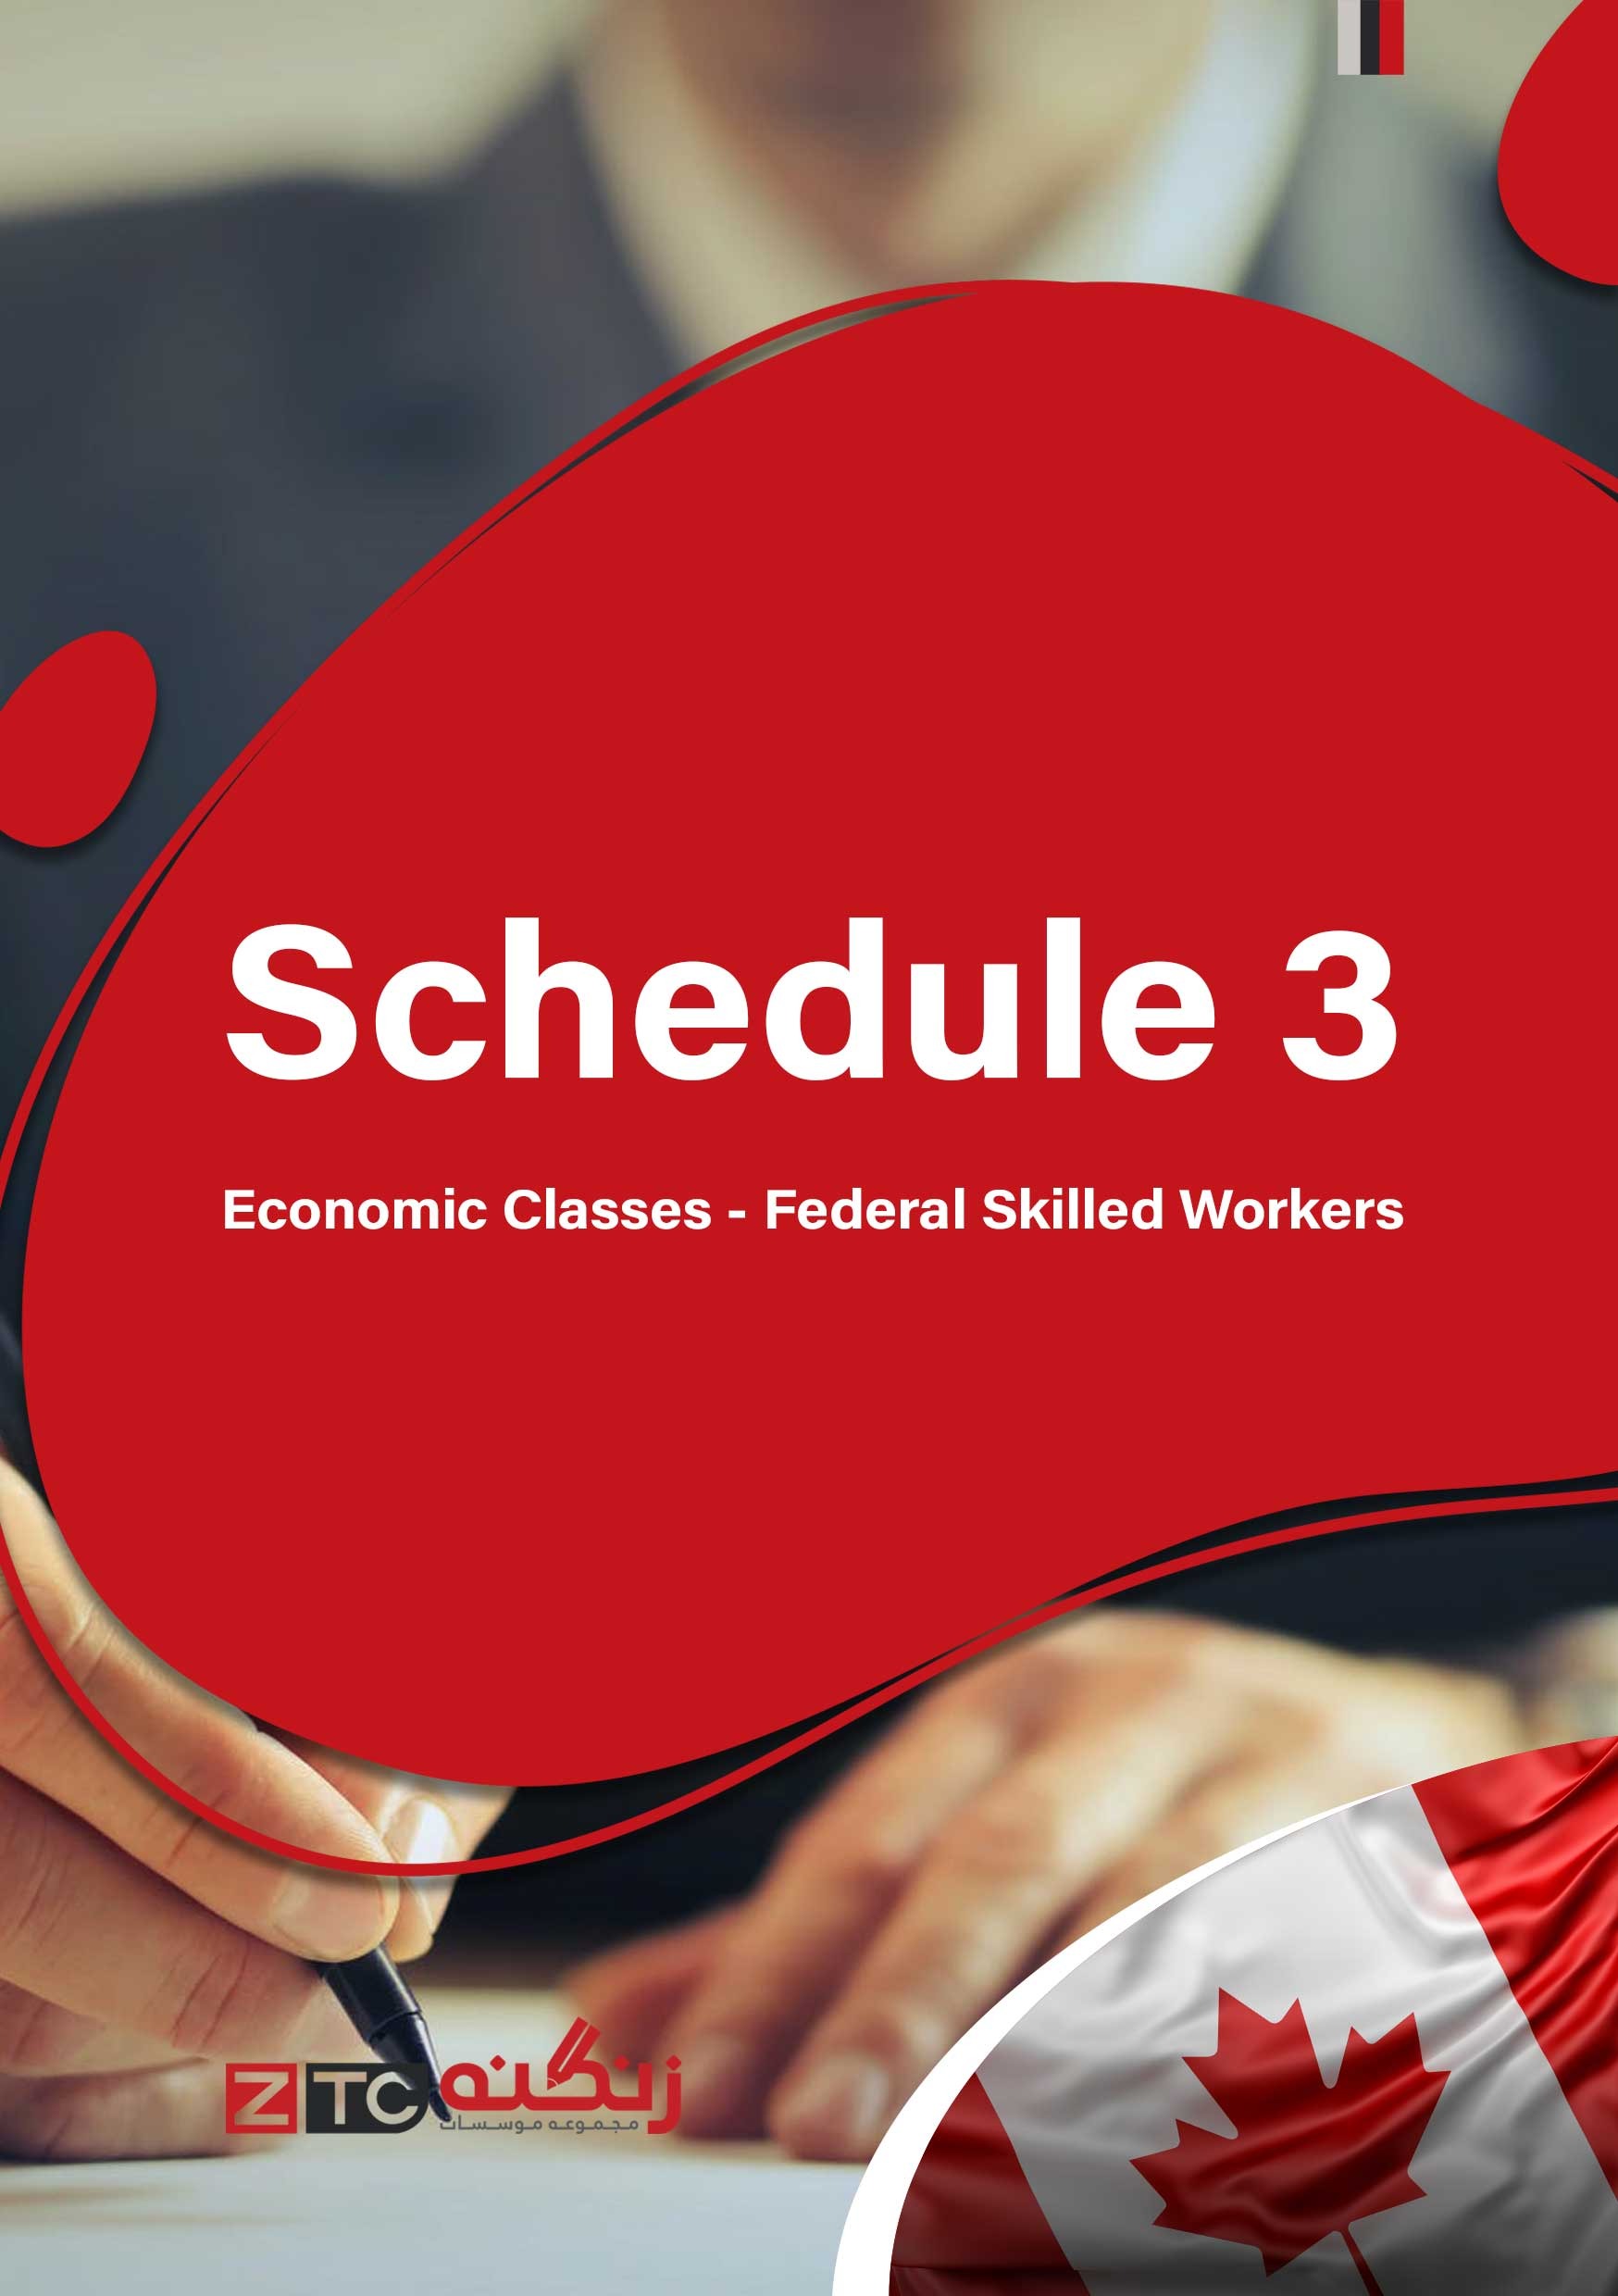 Schedule 3 Economic Classes - Federal Skilled Workers